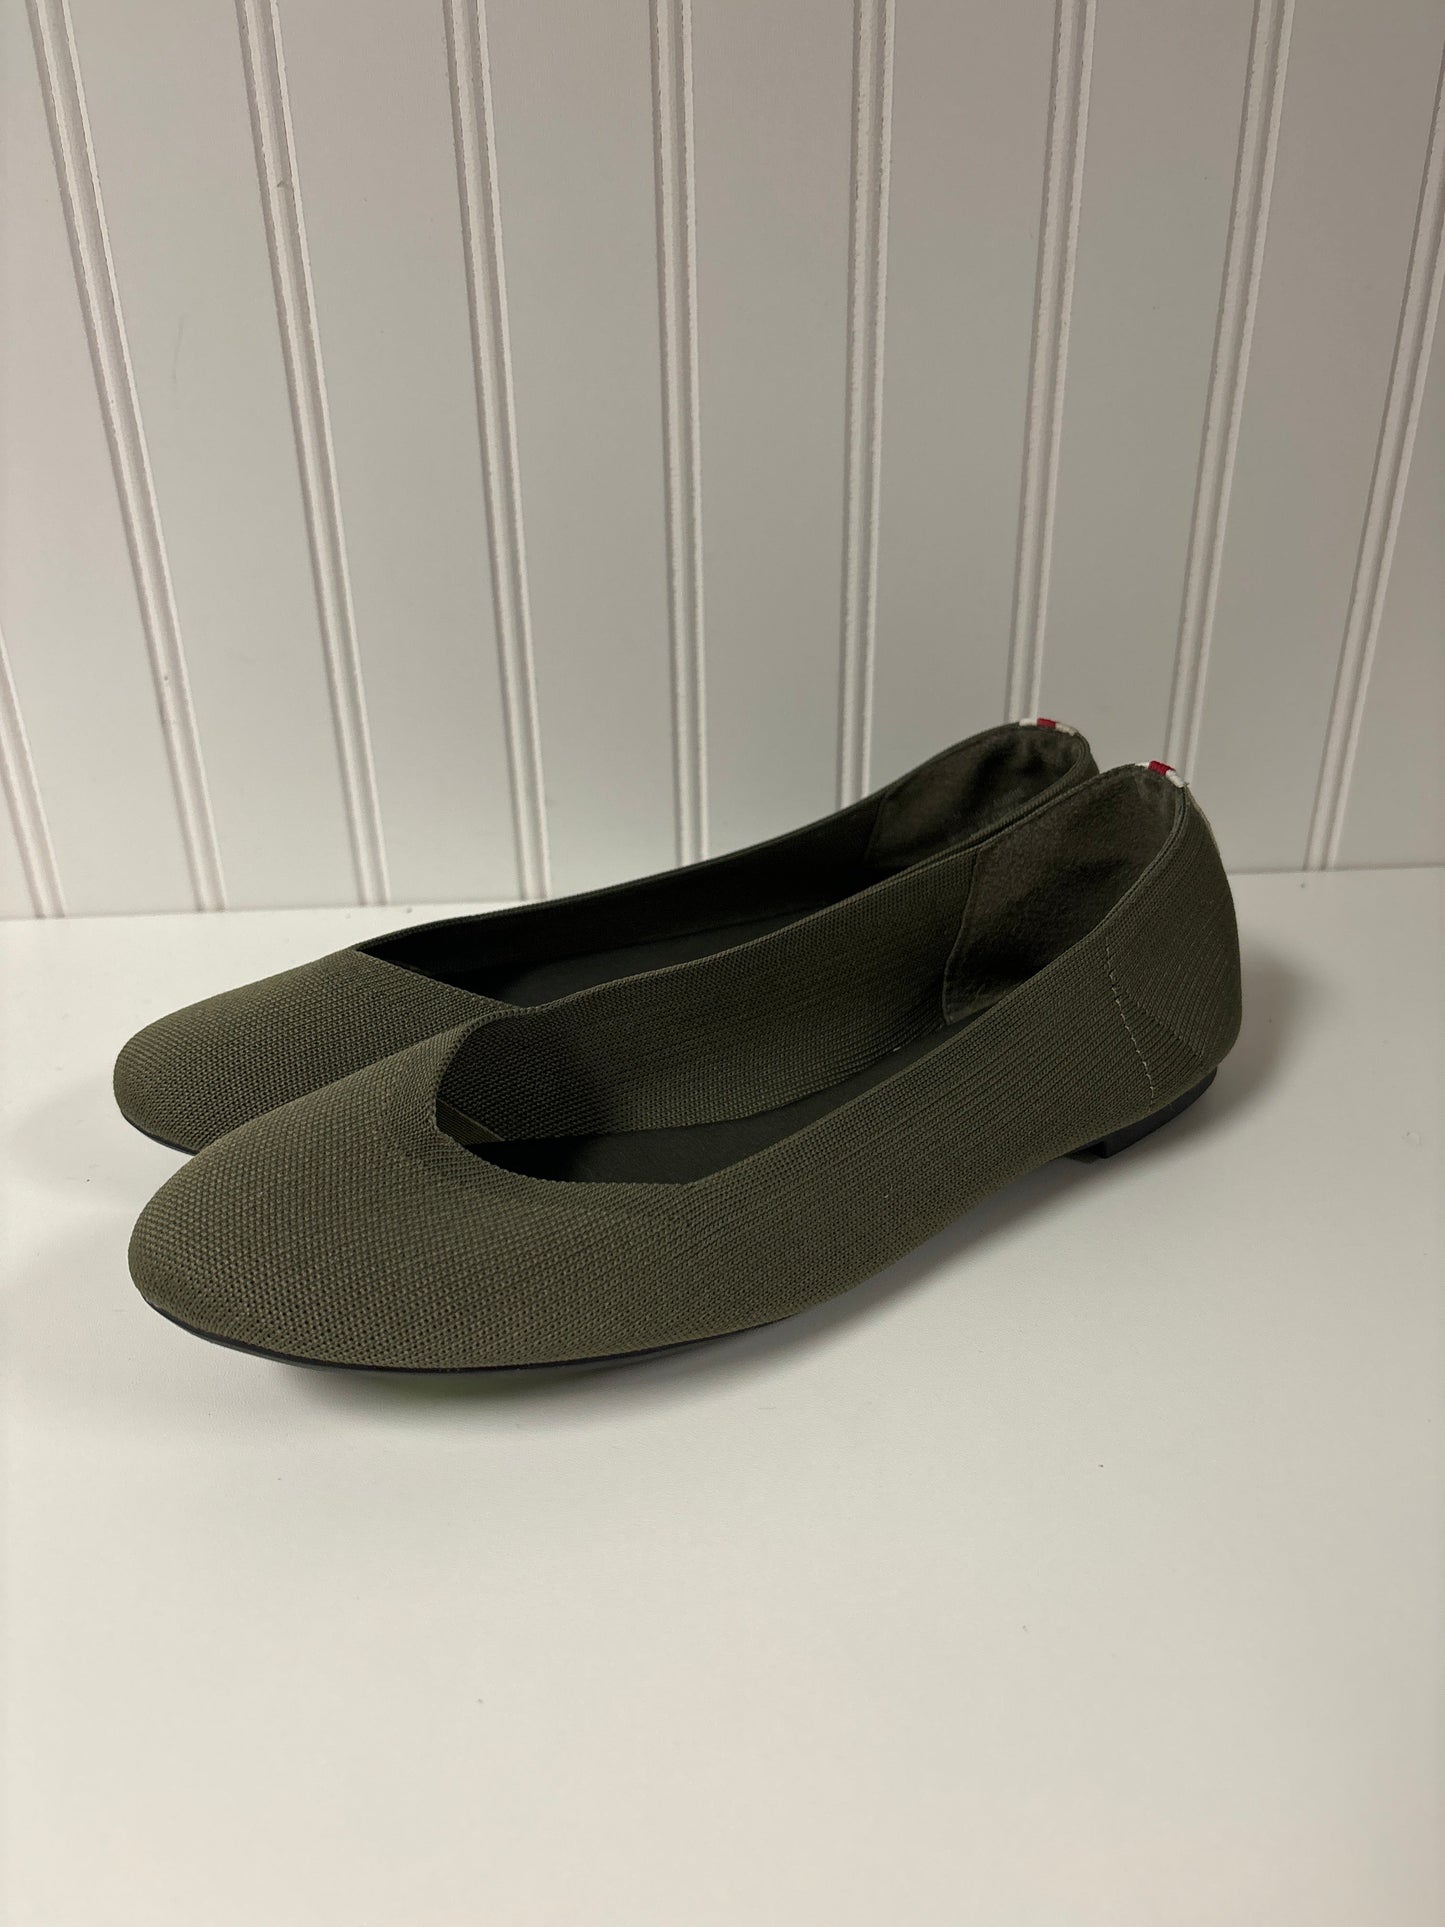 Shoes Flats By Mia  Size: 7.5